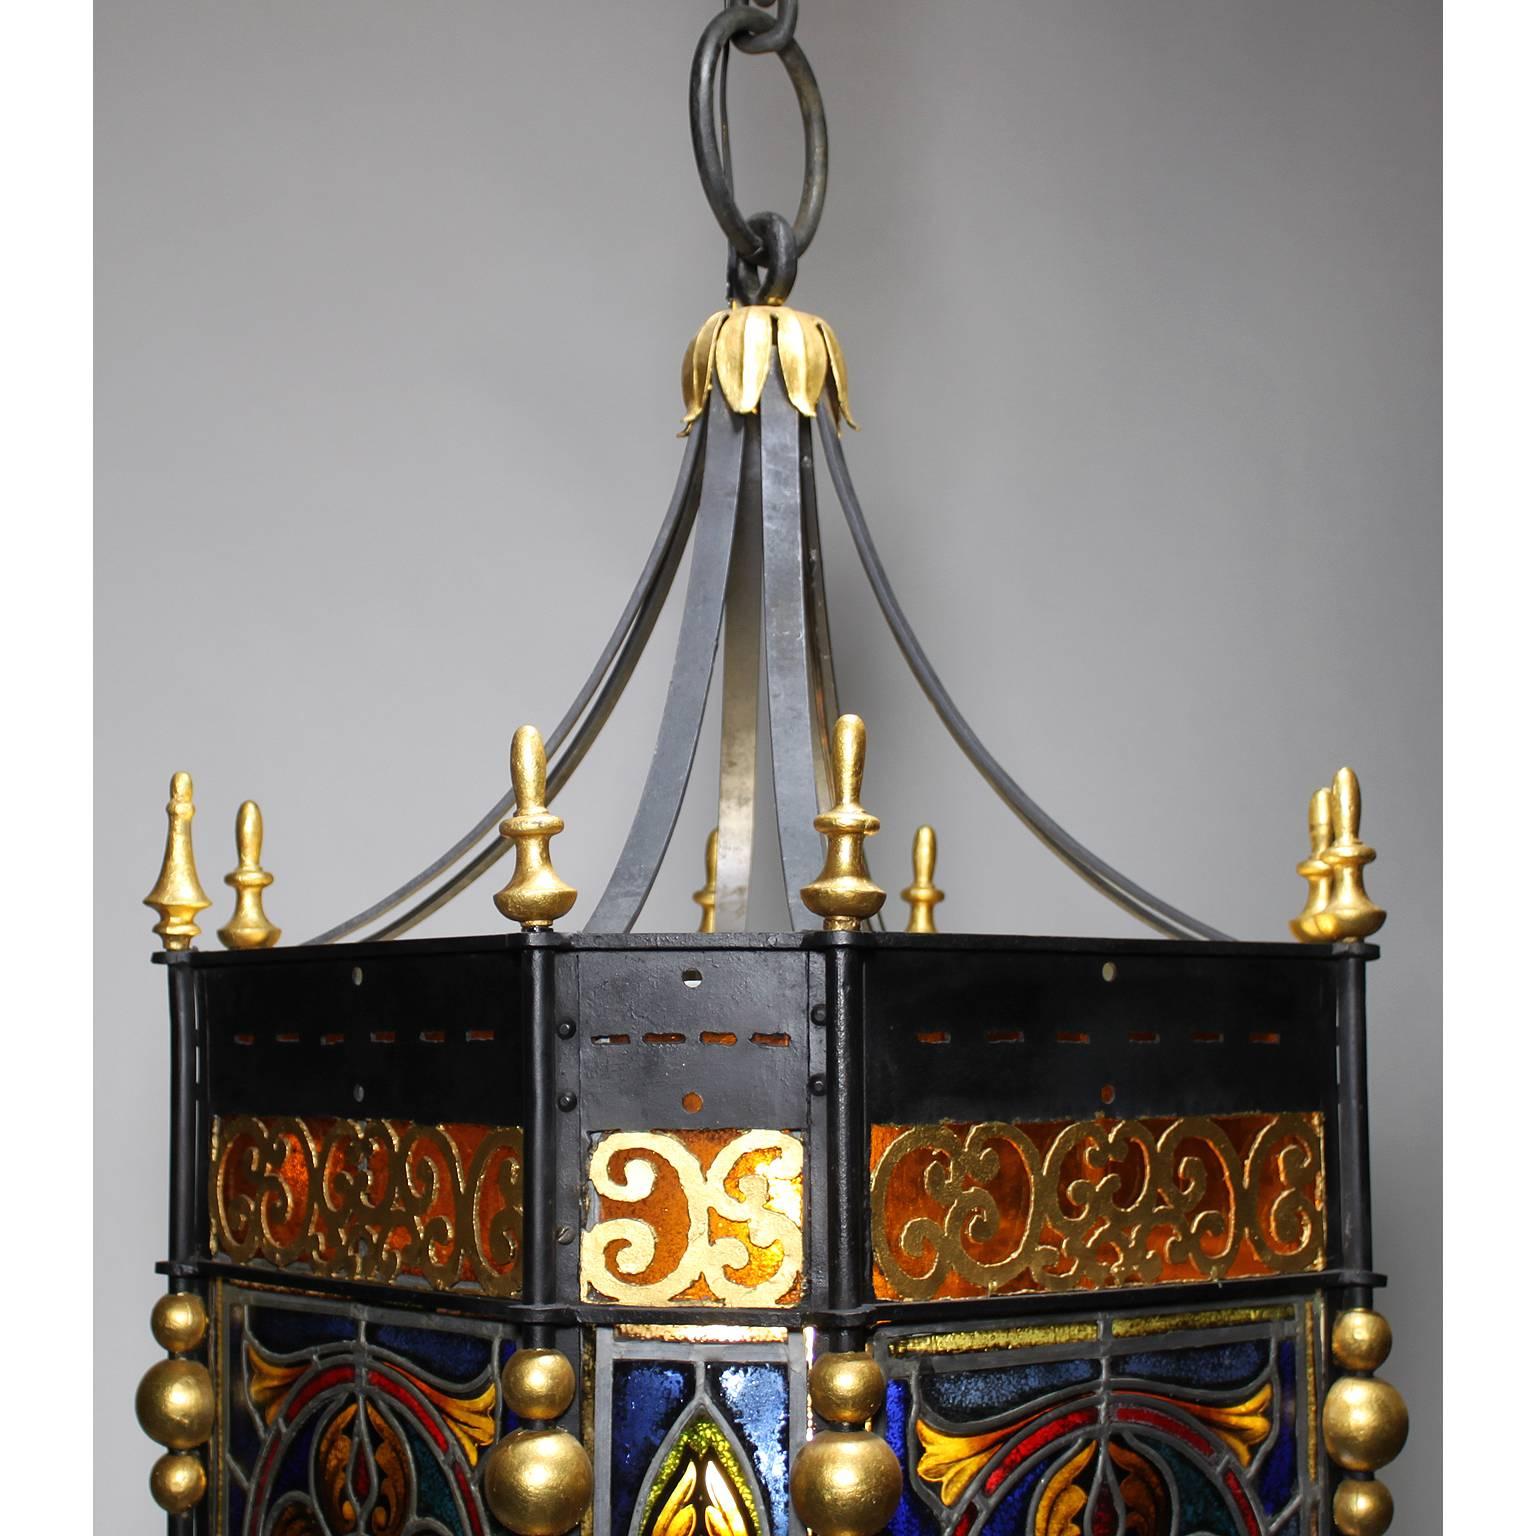 Art Glass Palatial Italian 19th Century Baroque Style Stained Glass Grand Hall Lantern